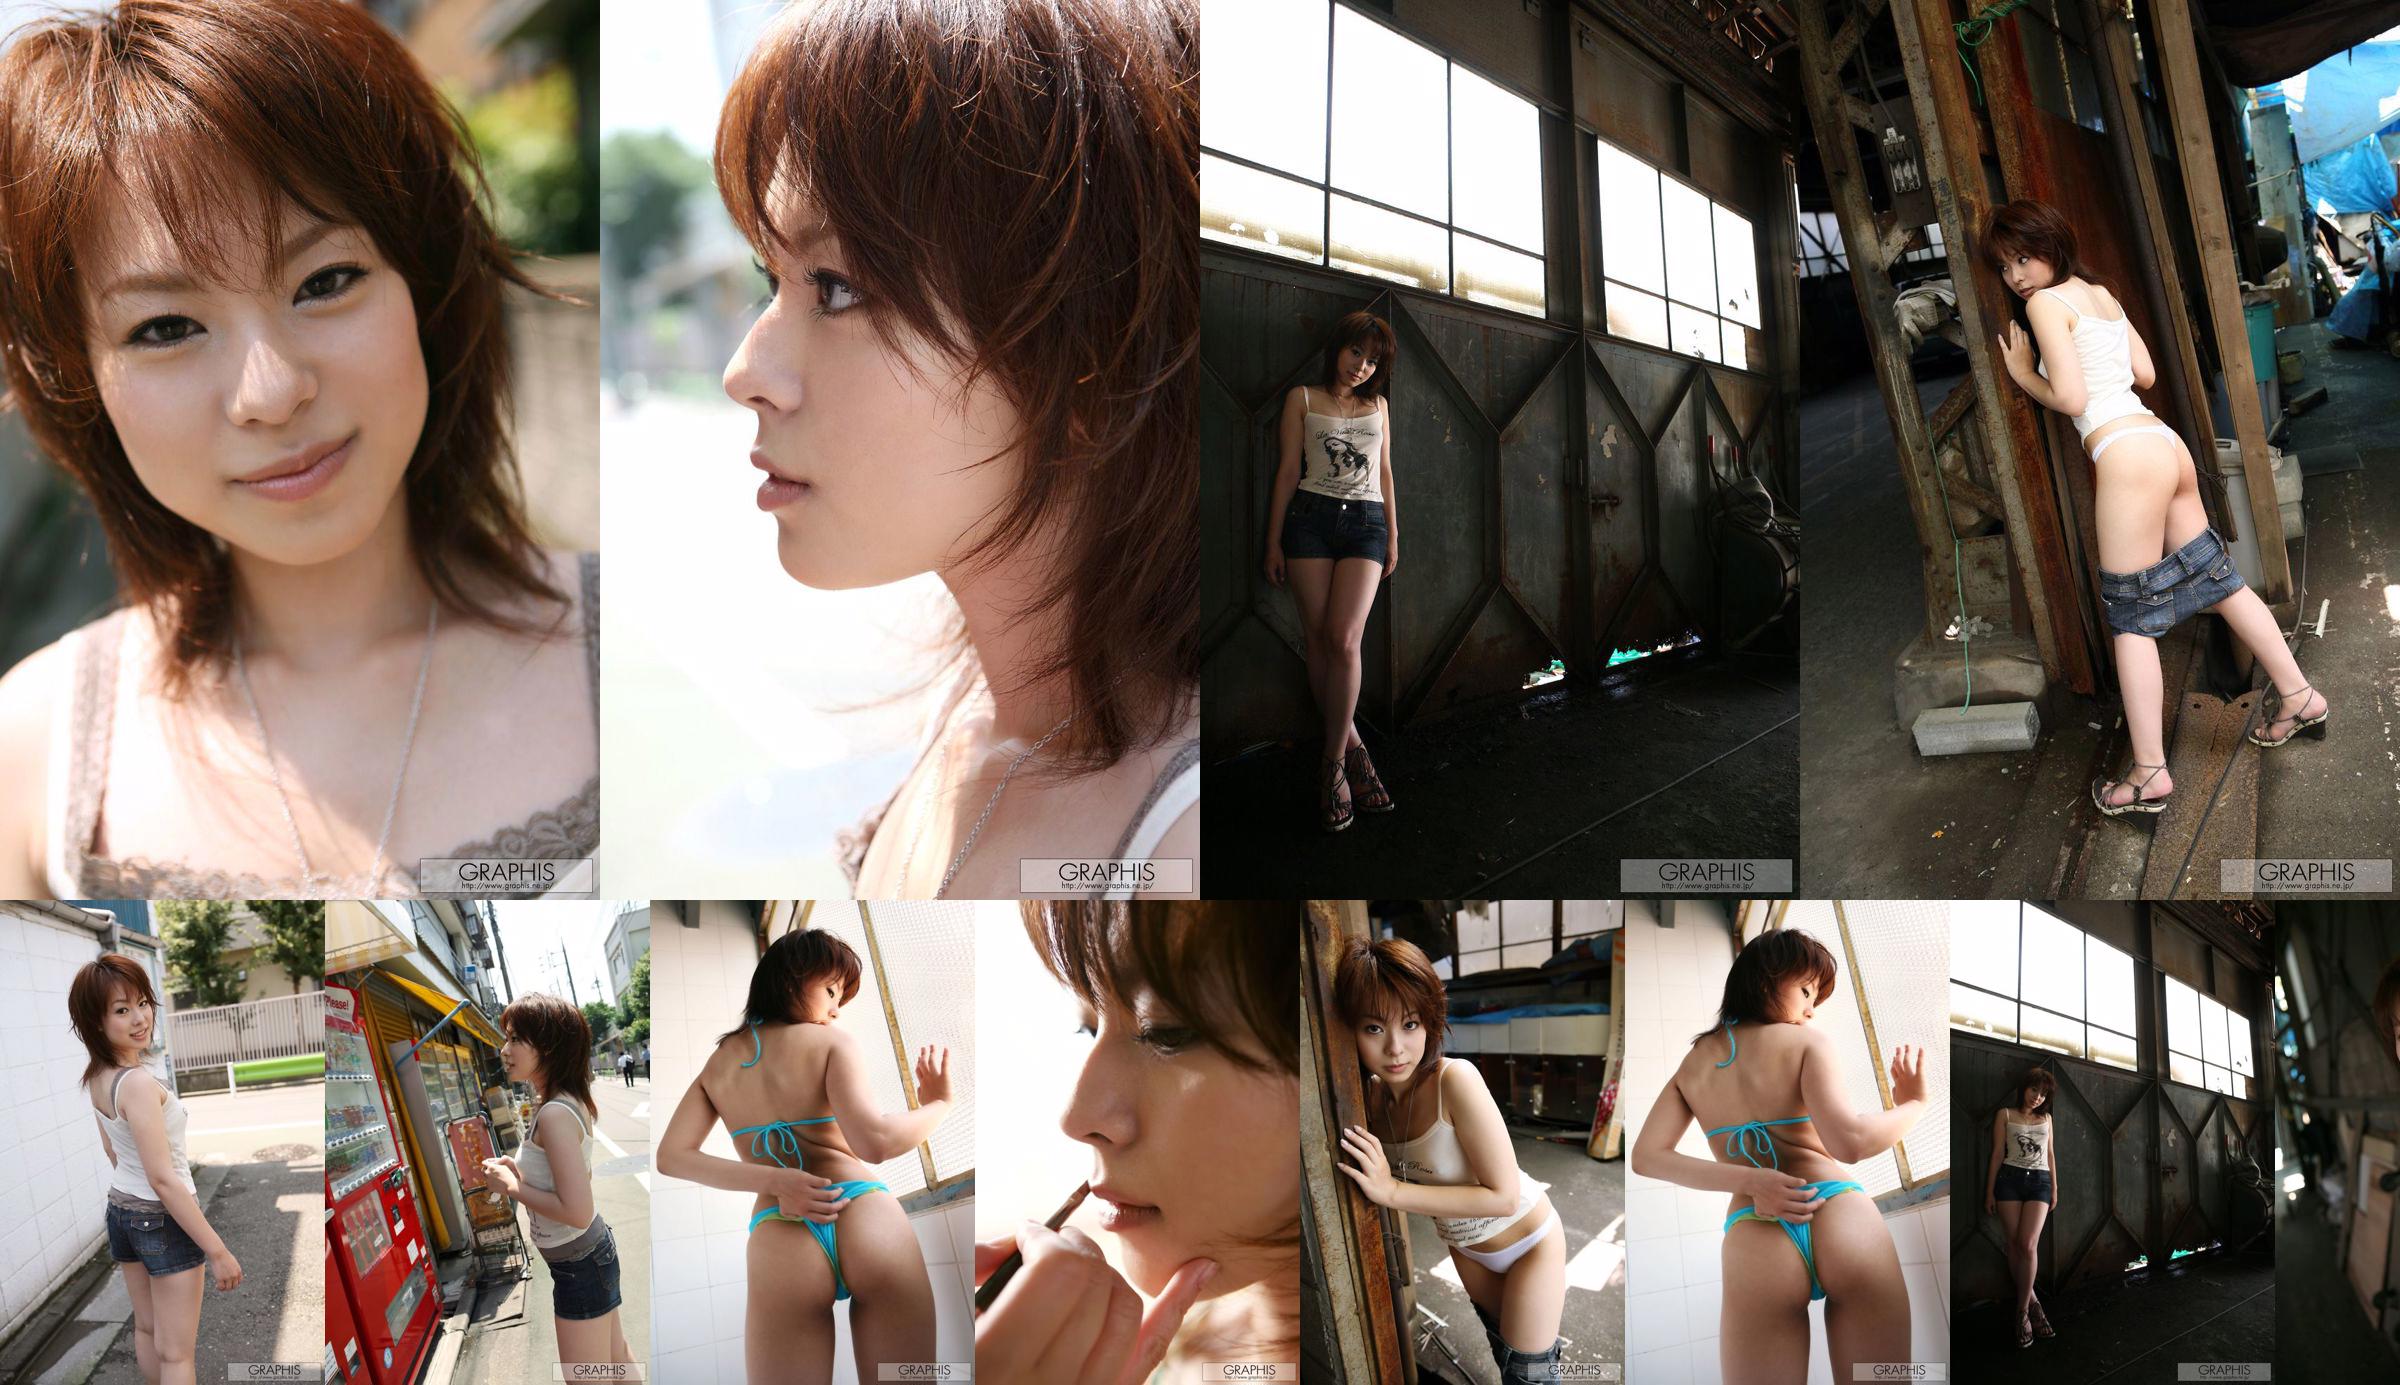 Mina Manabe Mina Manabe [Graphis] First Gravure First Take Off Con gái No.377cb7 Trang 24